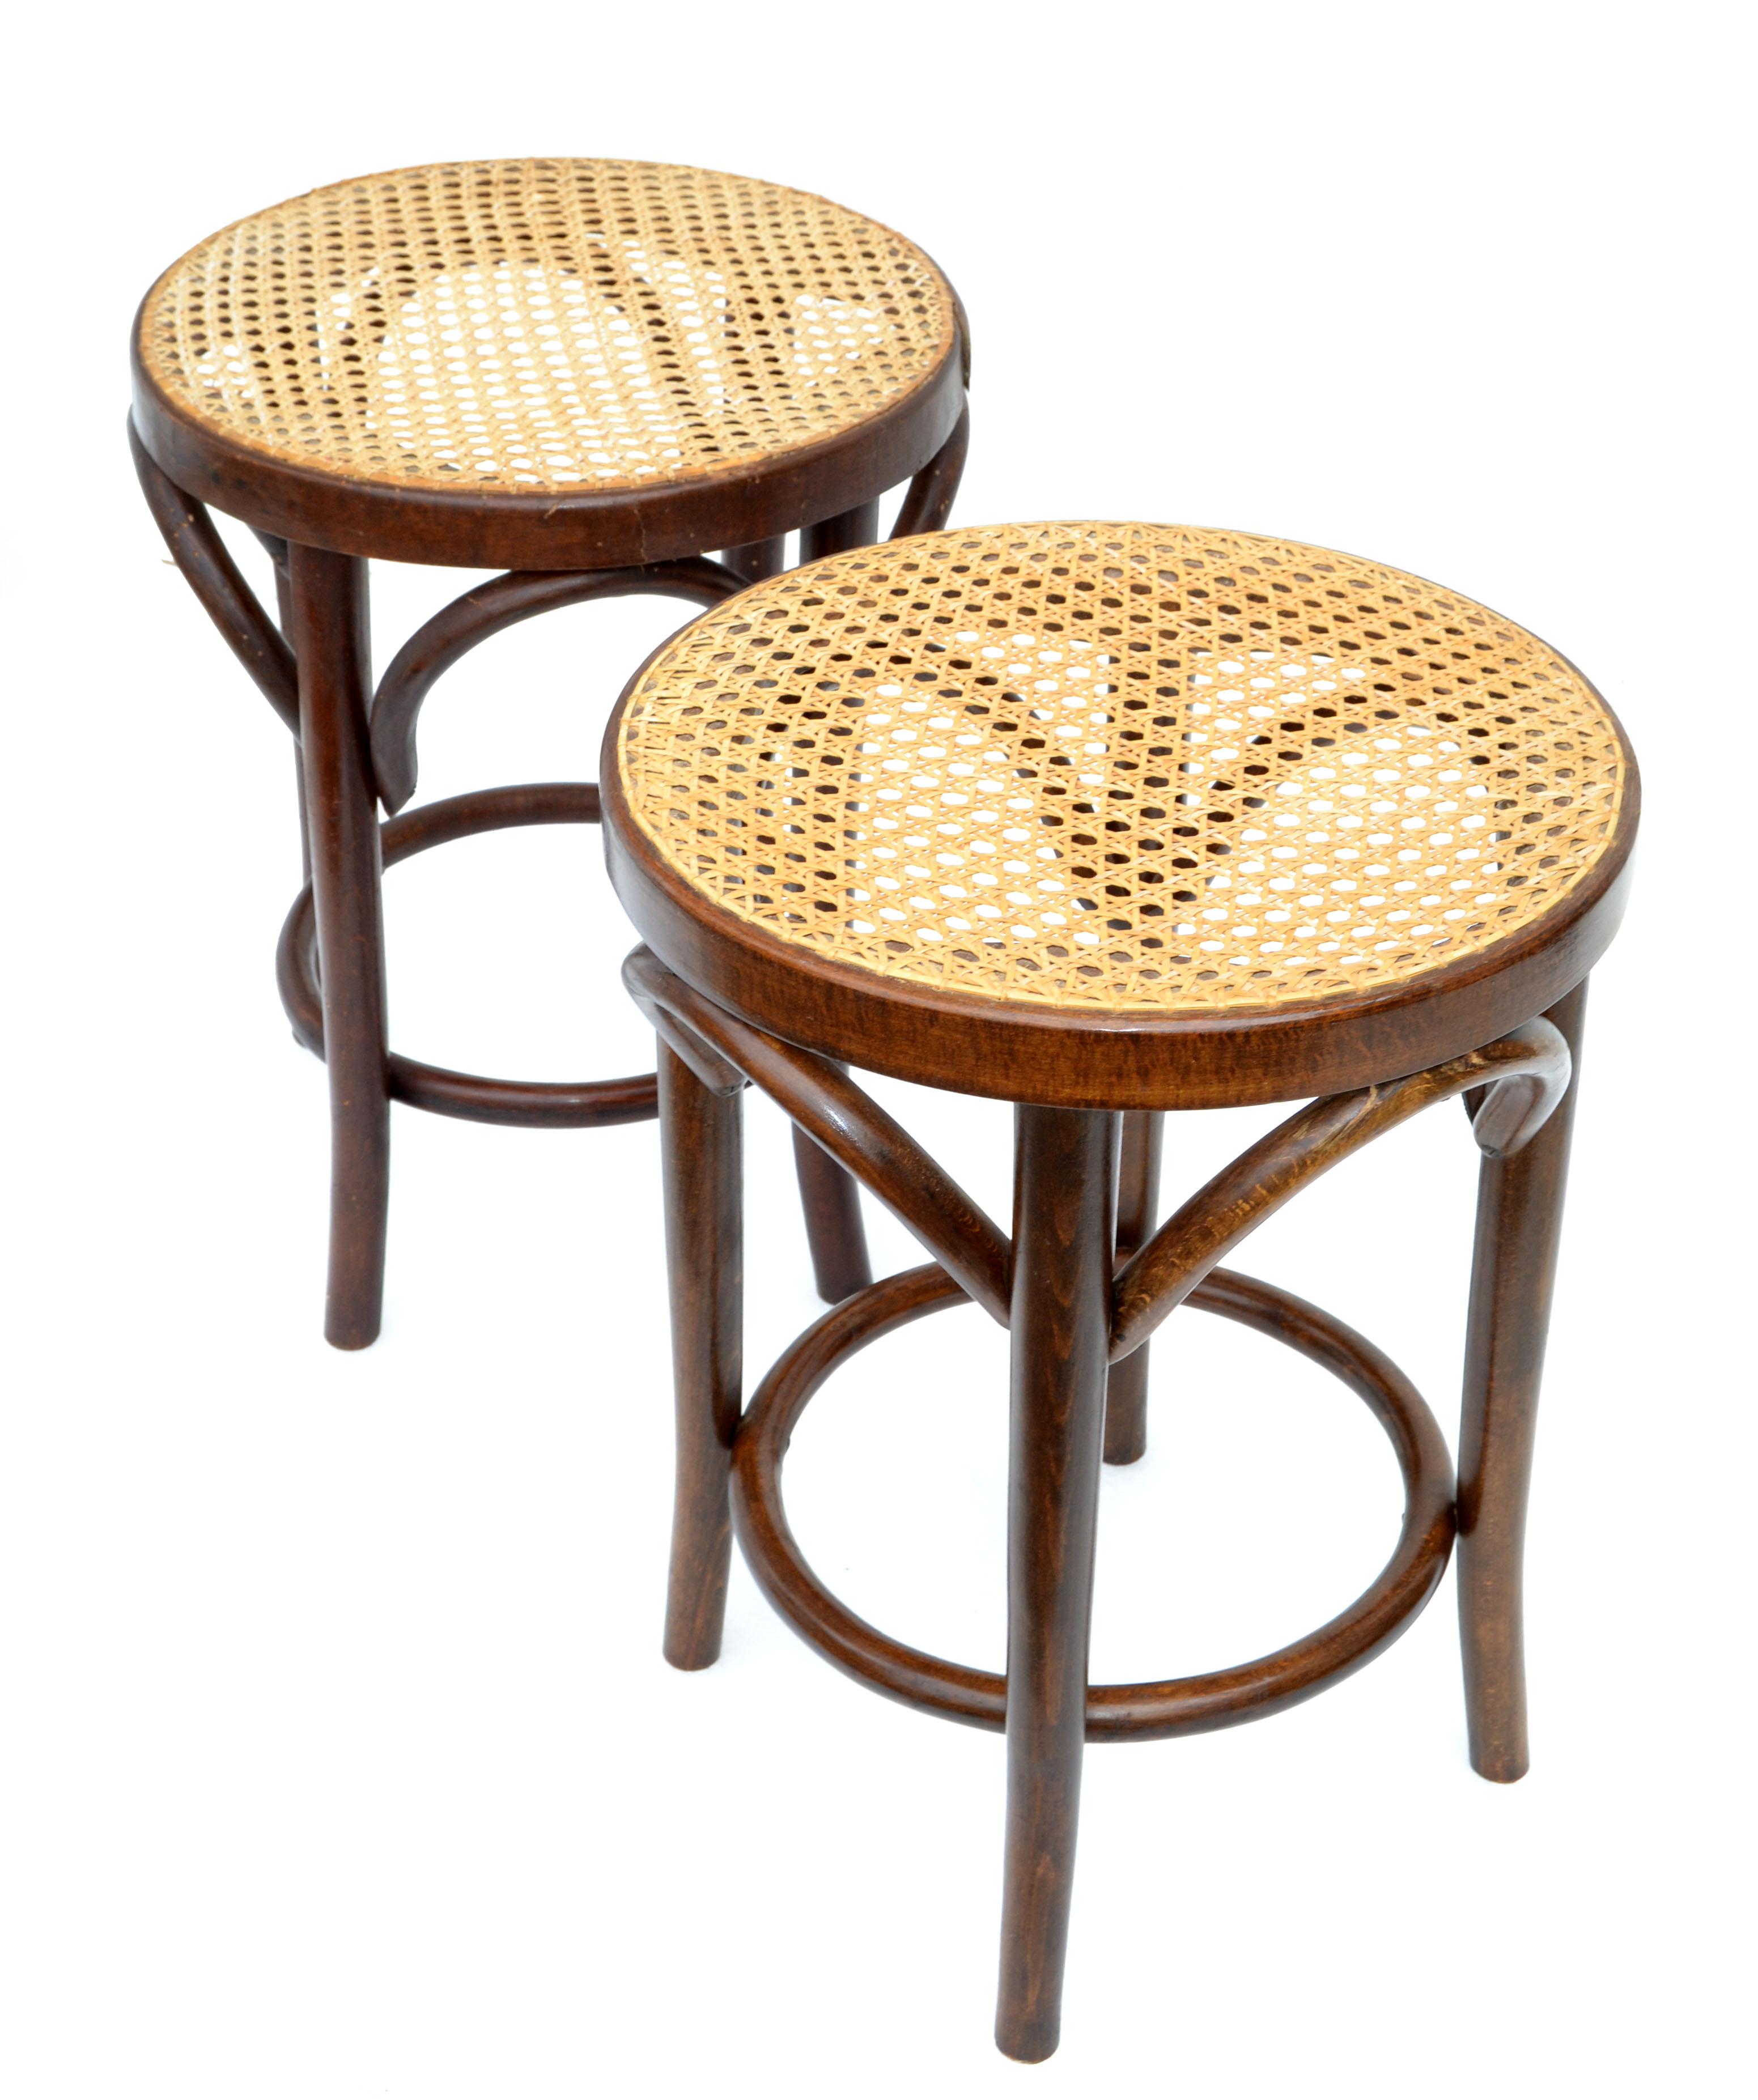 French Thonet Style Bentwood Stool & Handwoven Cane Seat Mid-Century Modern, 2